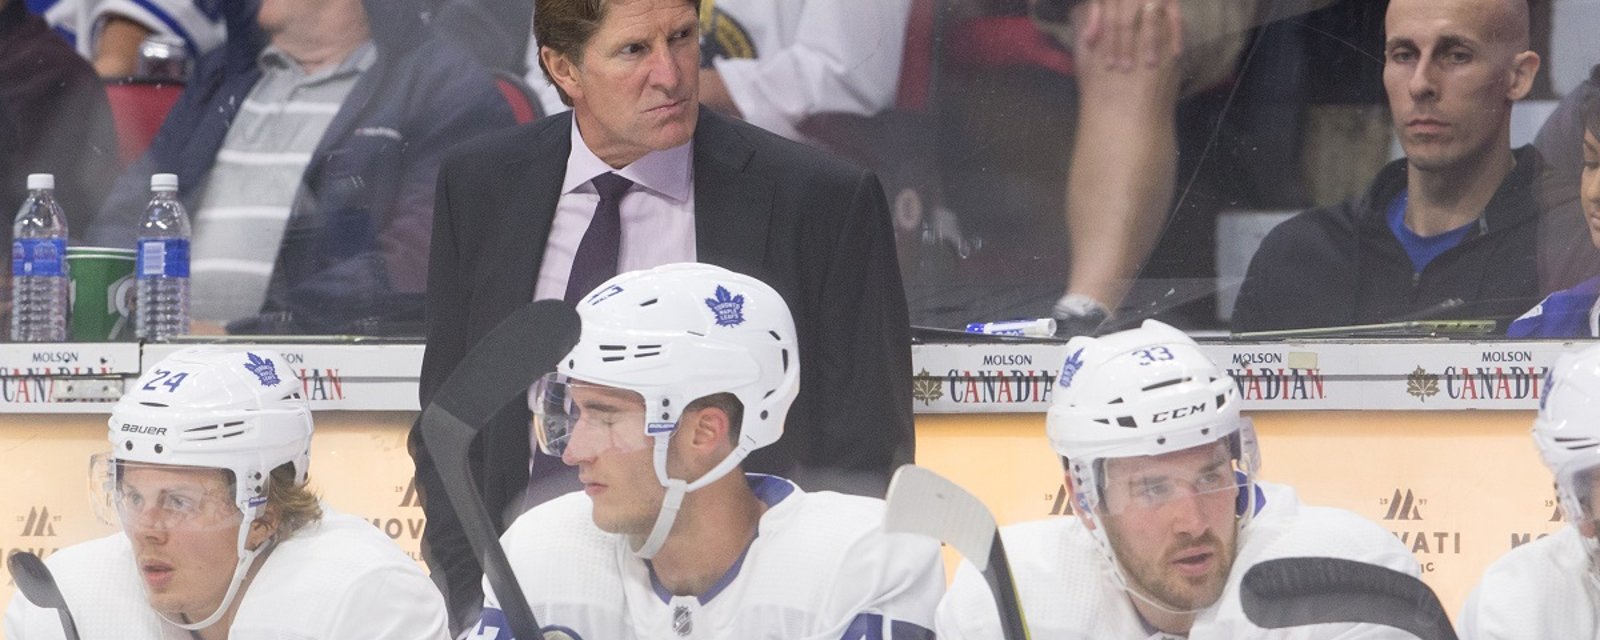 Babcock gets choked up on a very difficult day for the Maple Leafs head coach.